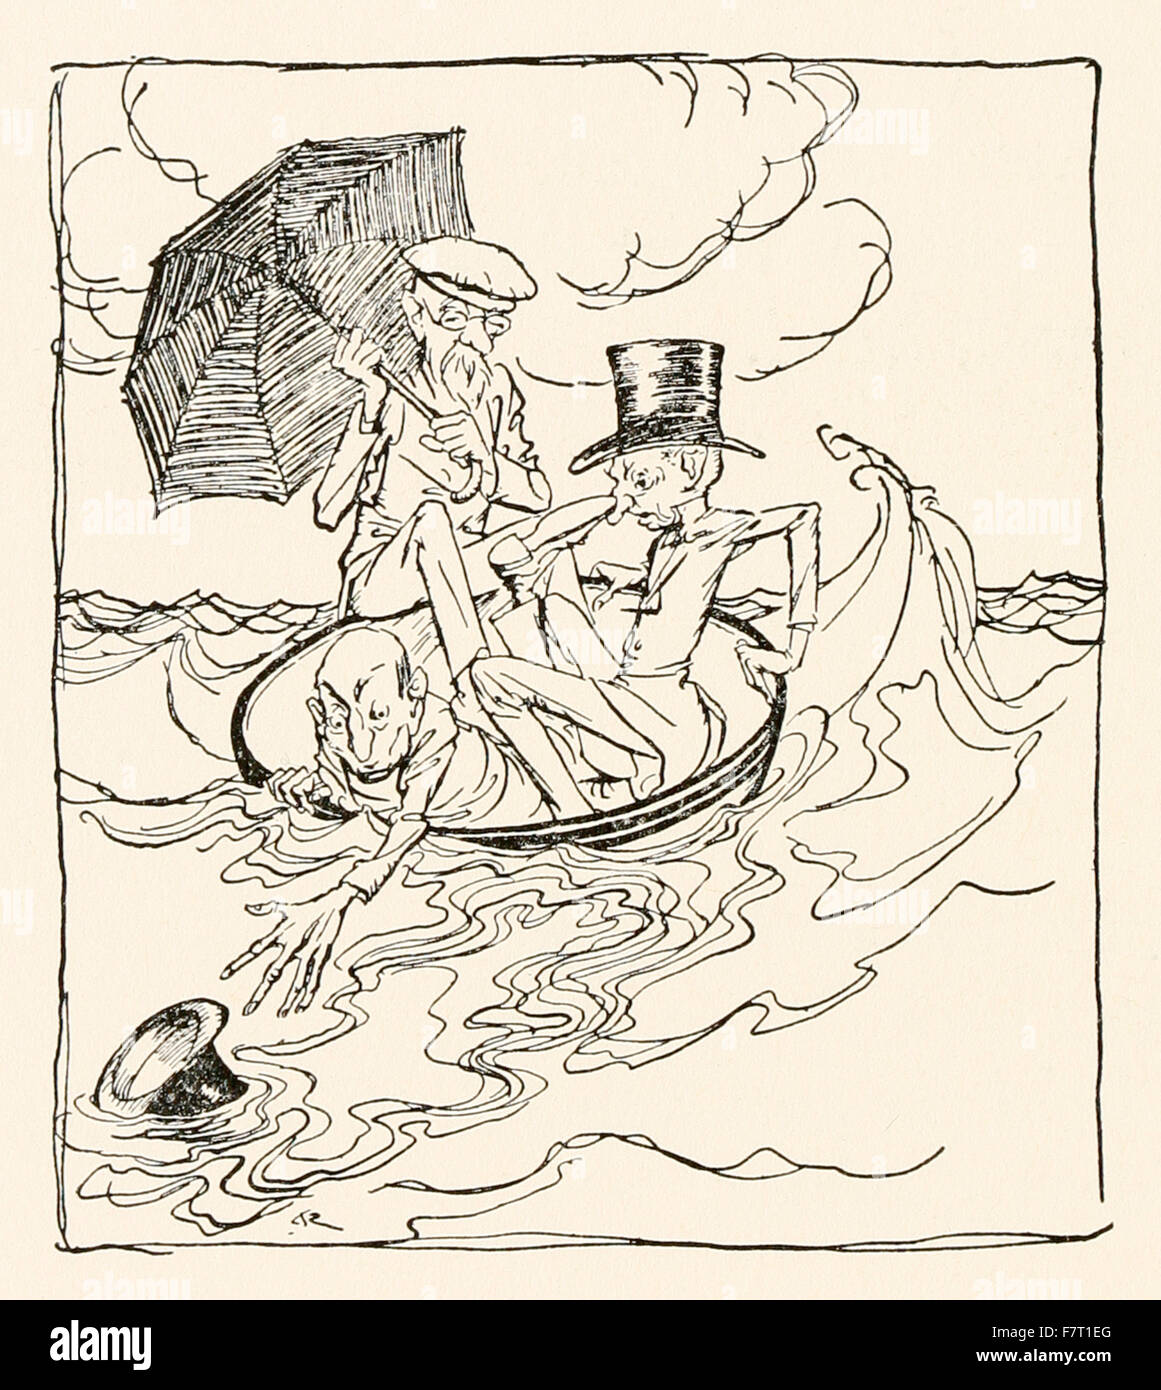 'Three wise men of Gotham' from 'Mother Goose - The Old Nursery Rhymes' illustration by Arthur Rackham (1867-1939). See description for more information. Stock Photo